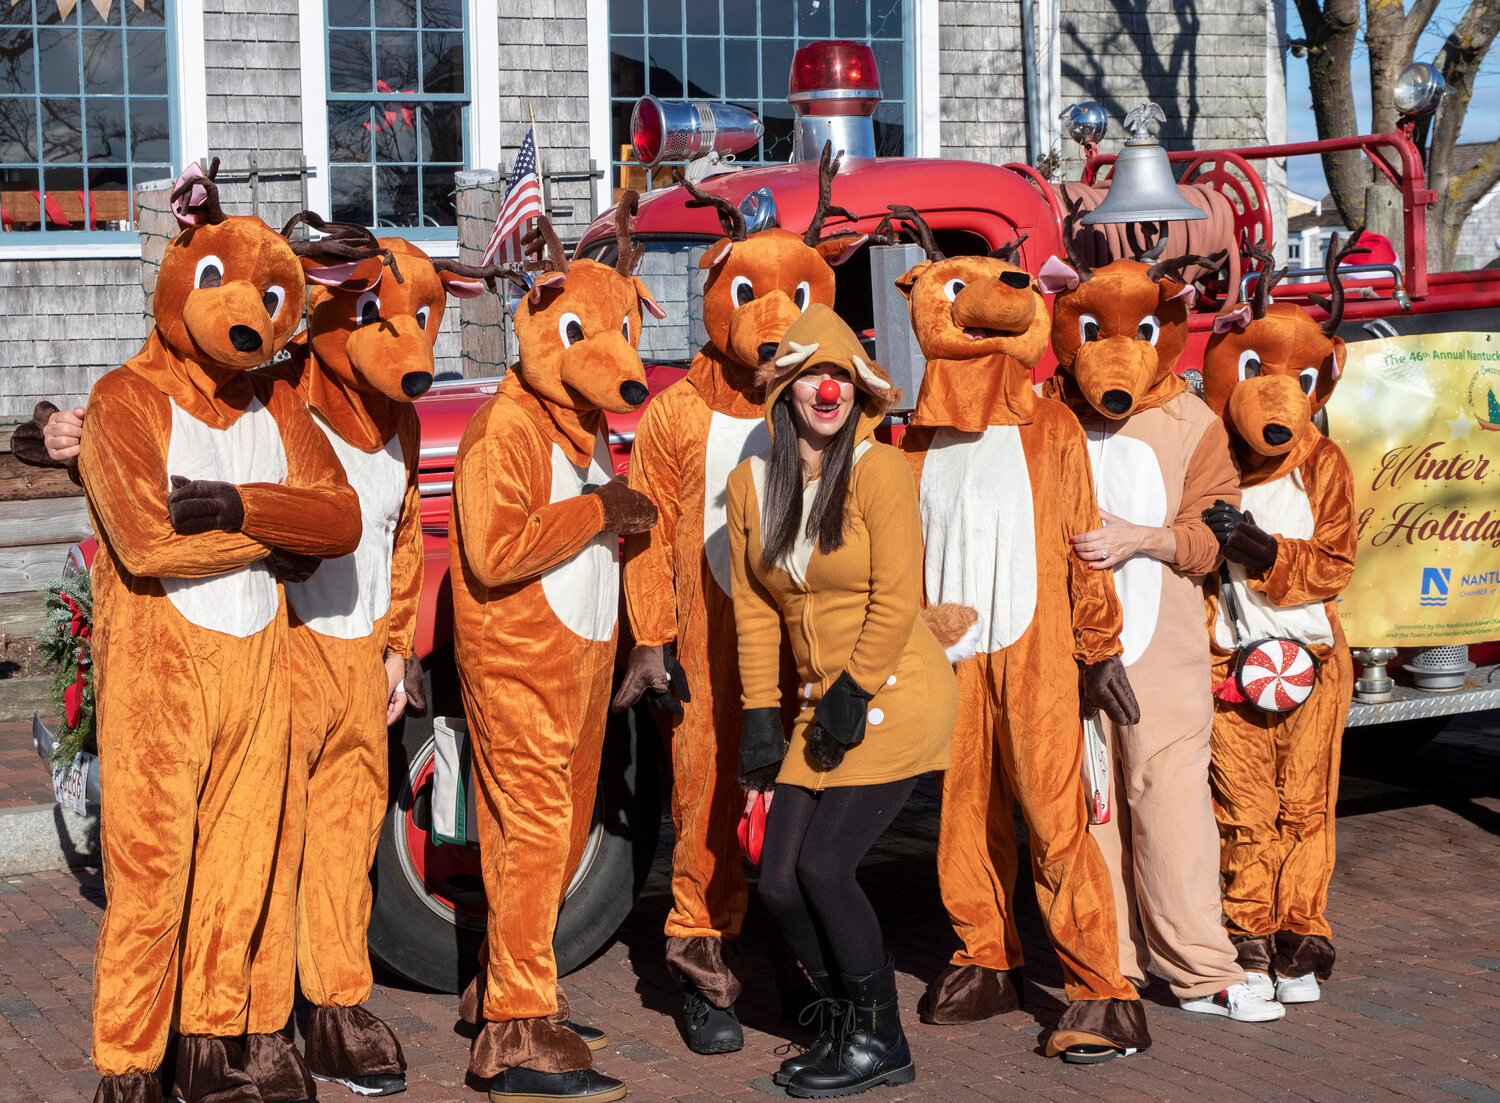 Visitors have been known to dress up in costume before making an annual pilgrimage to Nantucket for Christmas Stroll.